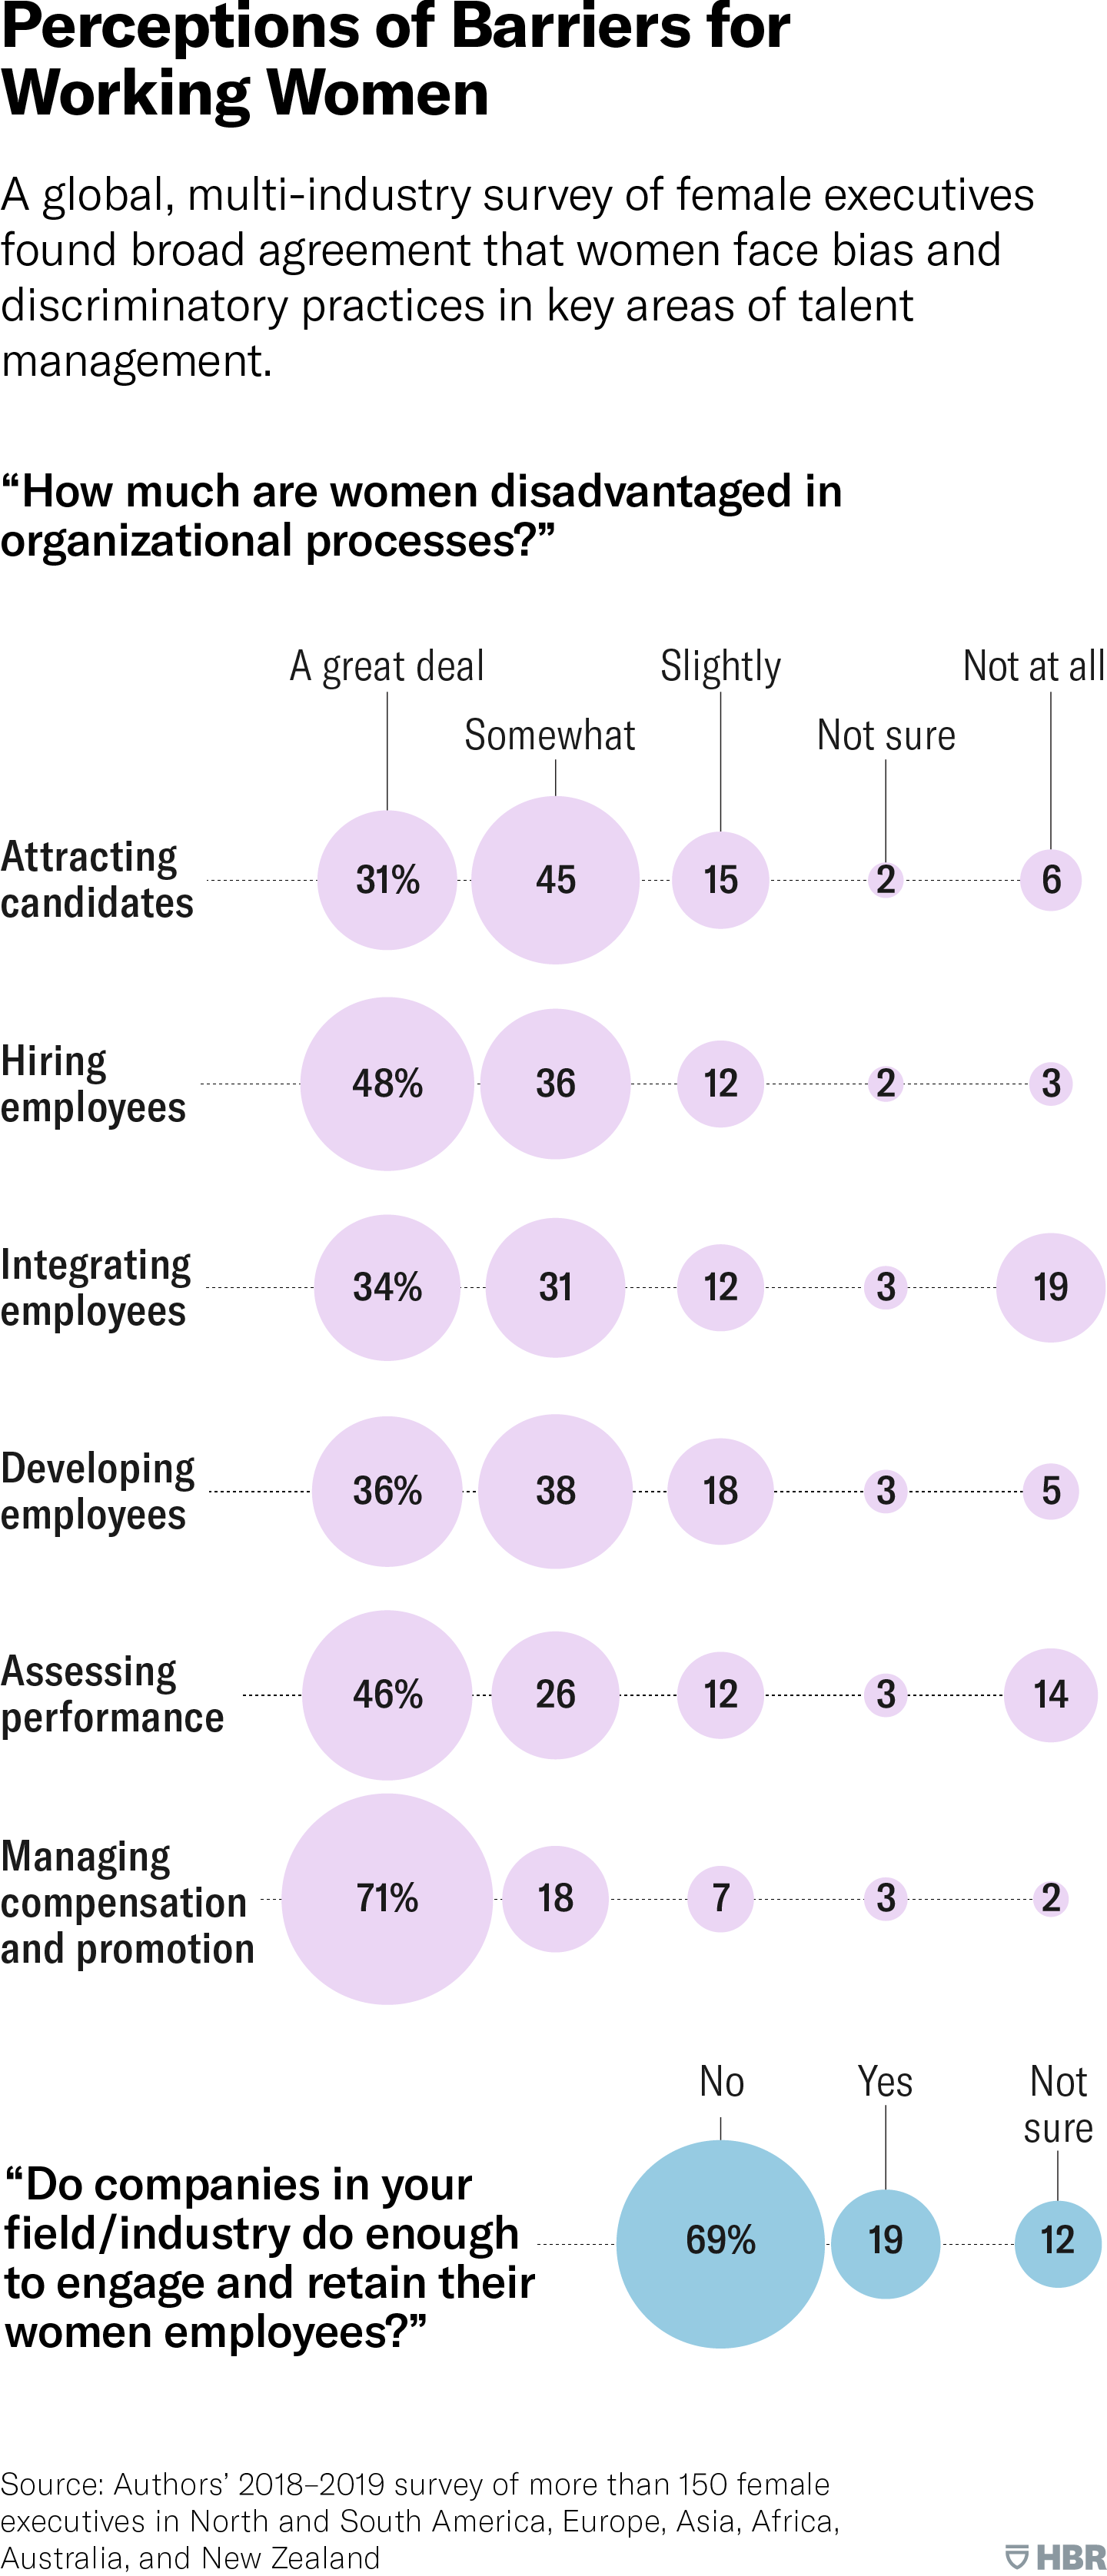 Perceptions of Barriers for Working Women. A global, multi-industry survey of female executives found broad agreement that women face bias and discriminatory practices in key areas of talent management.
The diagram shows how participants responded to questions about how much women are disadvantaged in six specific organizational processes: attracting candidates, hiring employees, integrating employees, developing employees, assessing performance, and managing compensation and promotion. The possible responses were that women are disadvantaged “a great deal,” “somewhat,” “slightly,” or “not at all”; respondents could also answer “not sure.” In all cases, a large percentage of respondents—at least 65%—chose “somewhat” or “a great deal.” The diagram also shows that when asked if companies in their field did enough to engage and retain women employees, 69% of respondents said no, 19% said yes, and 12% were not sure. Source: Authors’ survey, conducted in 2018 and 2019, of more than 150 female executives in North and South America, Europe, Asia, Africa, Australia, and New Zealand.